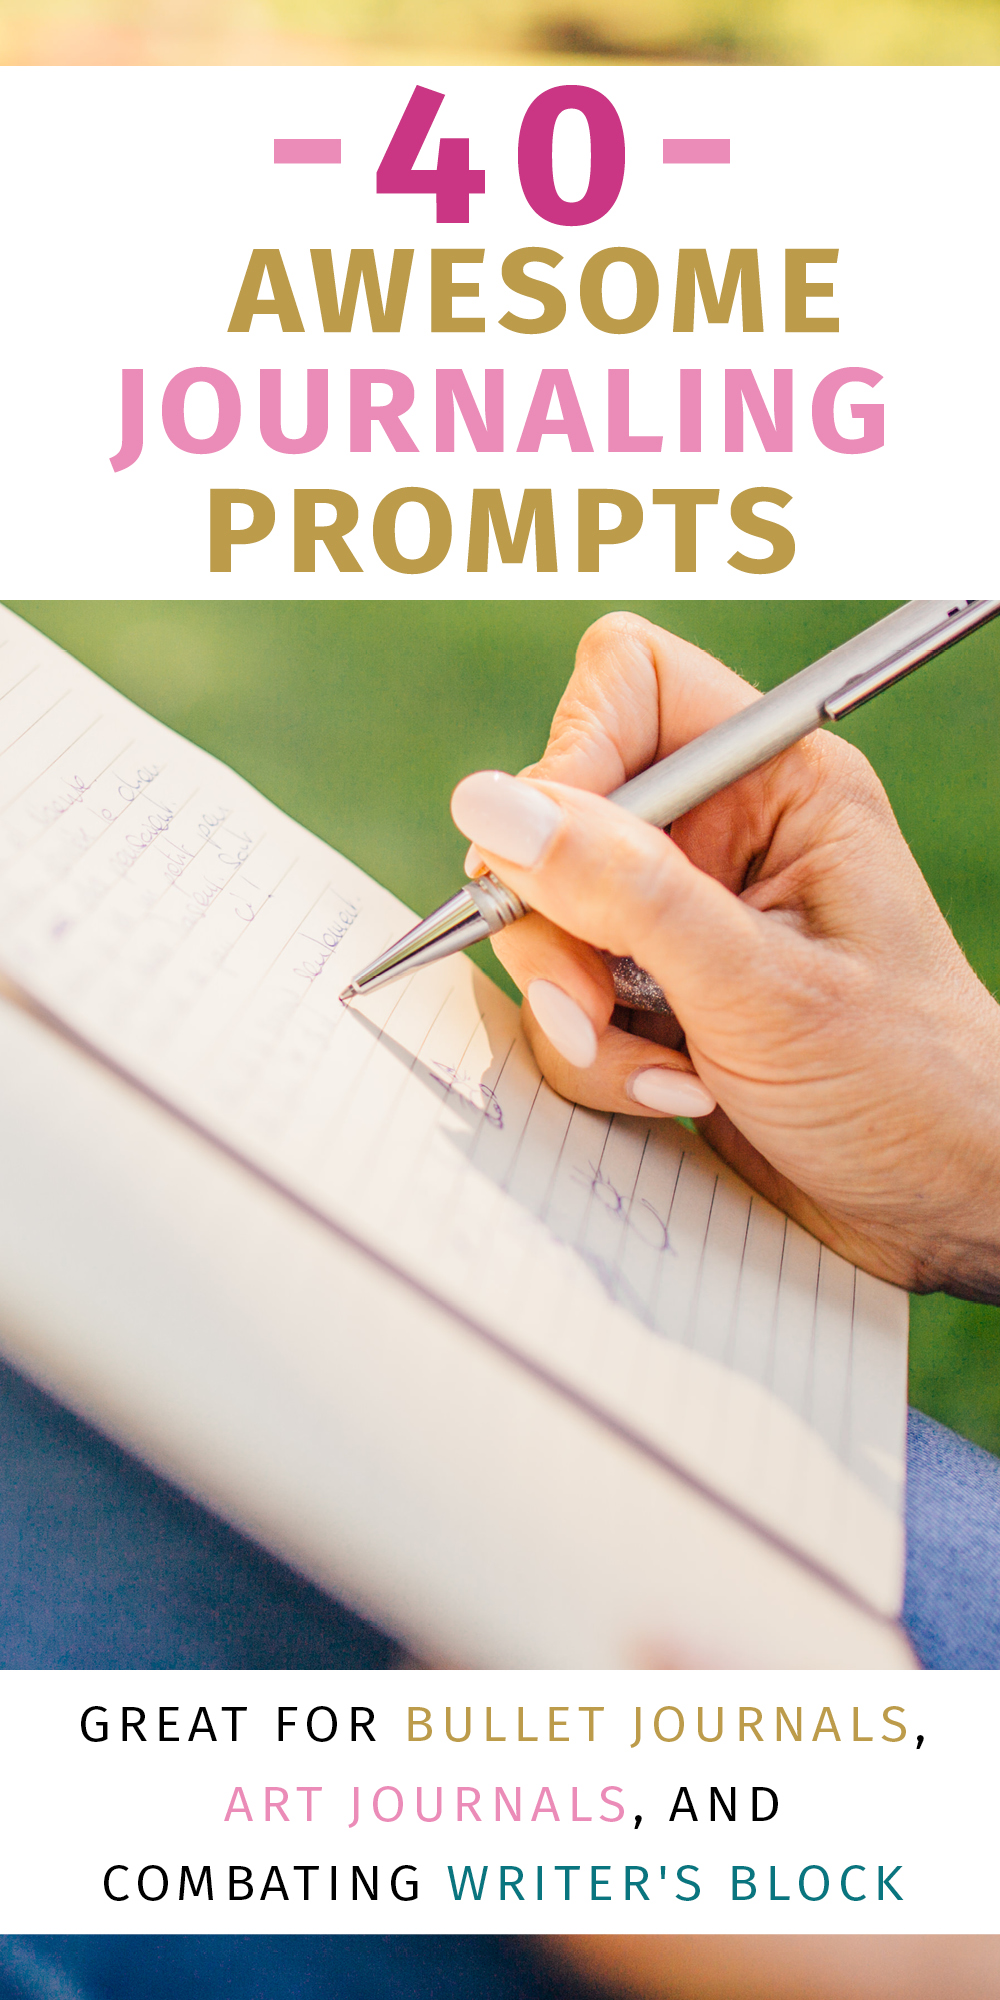 40 Awesome Journaling Prompts